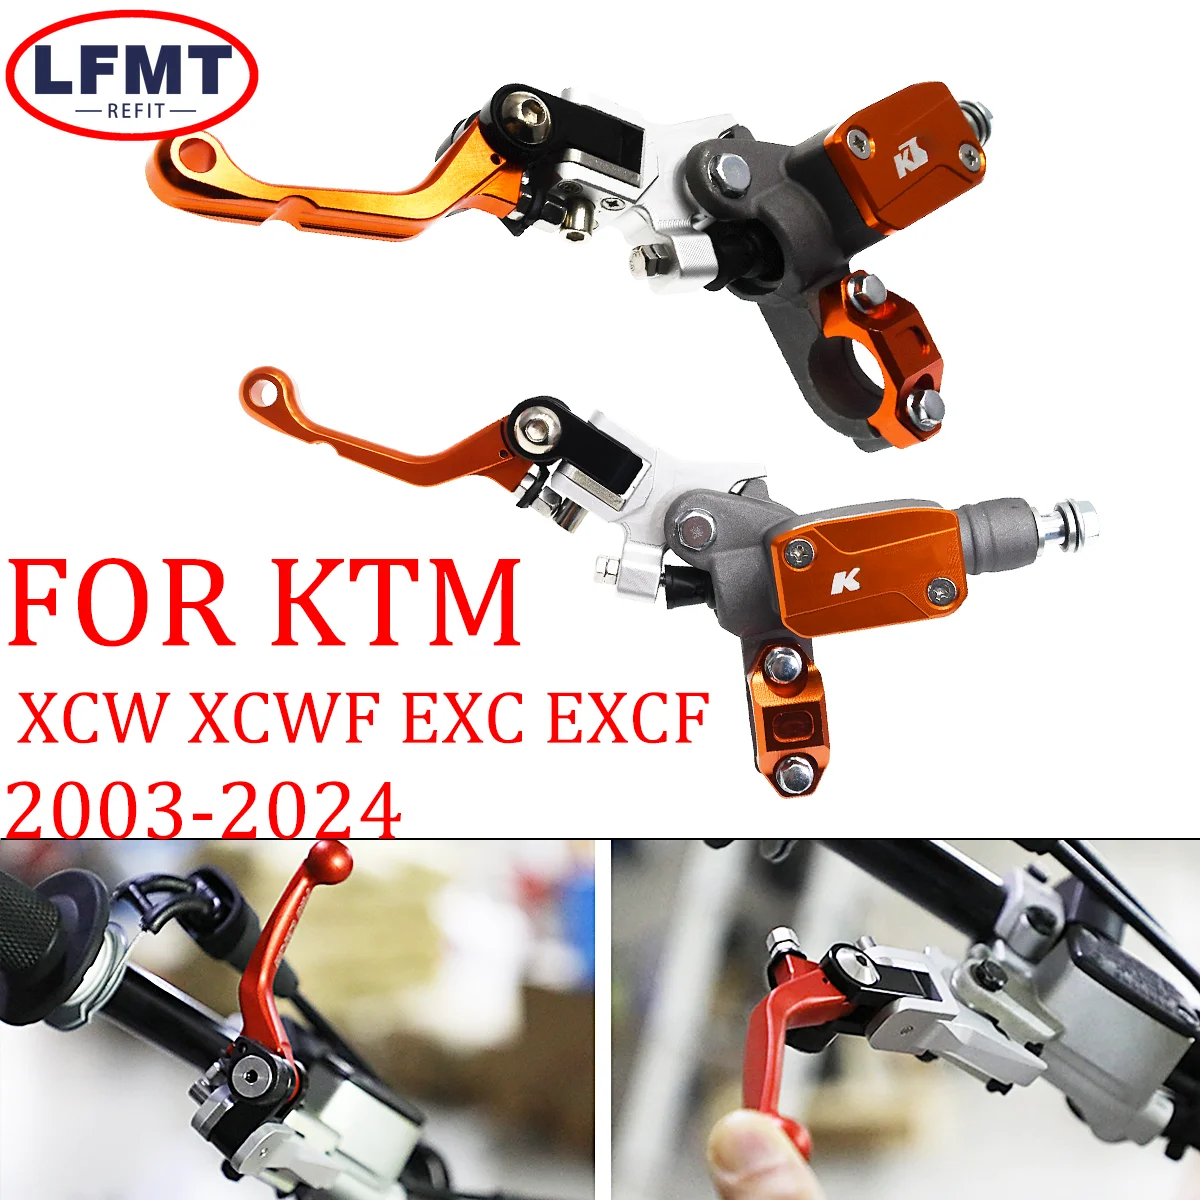 

22mm 7/8'' left Right Brake Master Cylinder Clutch Pump Brake Lever Motorcycle For KTM 125-500 SX SXF XC XCF XCW XCF-W EXC EXCF